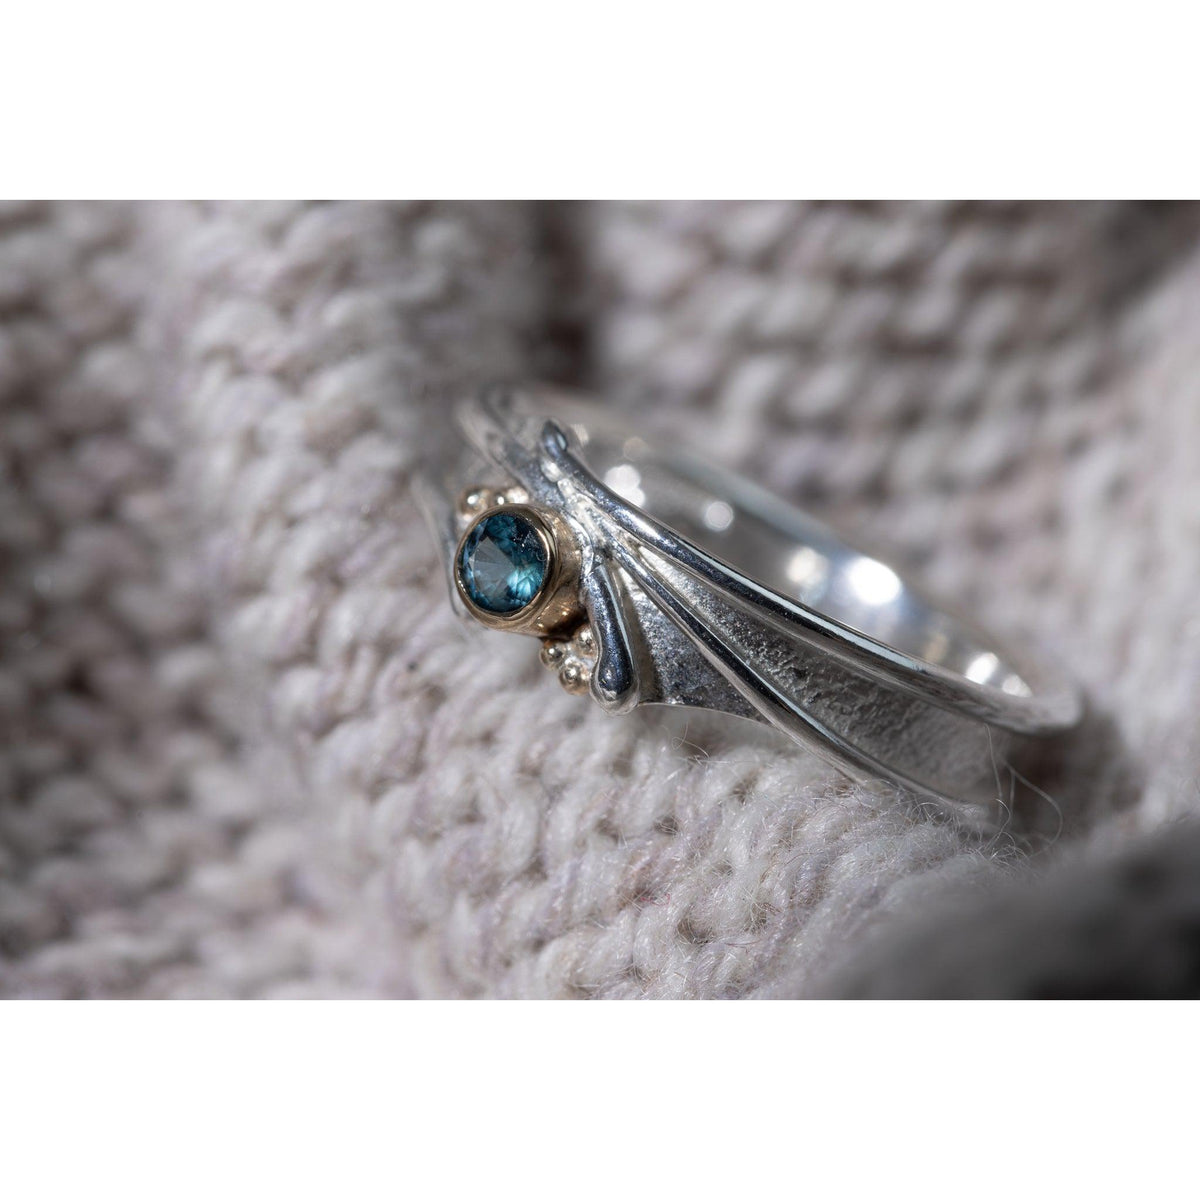 &#39;LG62 - Silver Ring with 9ct Gold 3.5mm London Blue Topaz Ring &#39; by Les Grimshaw, available at Padstow Gallery, Cornwall